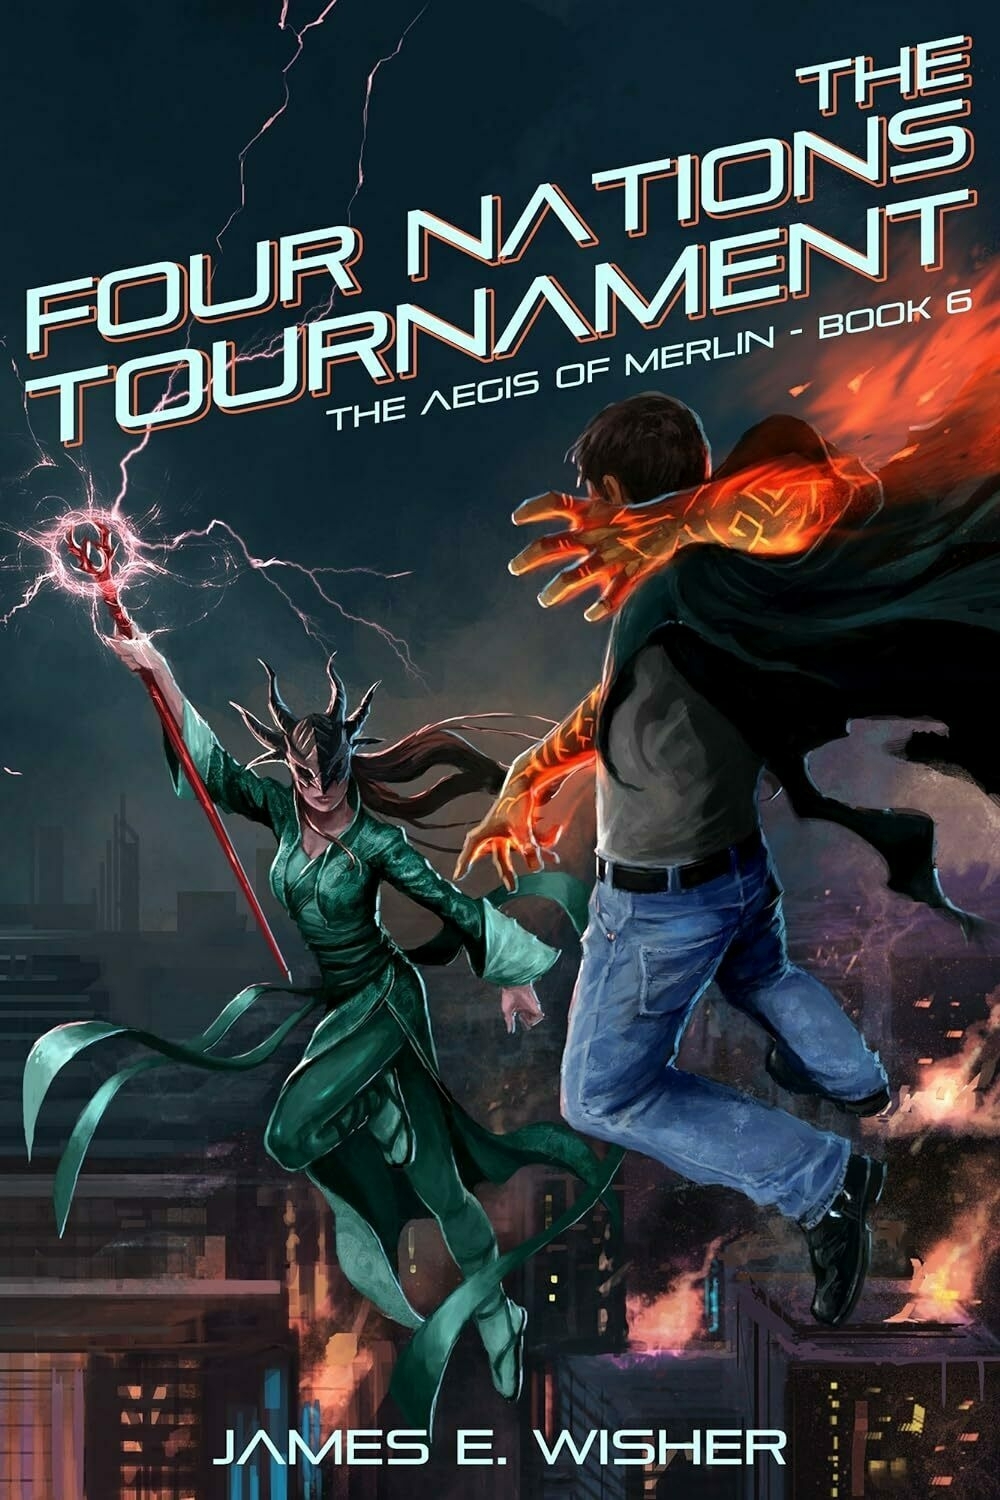 Two characters with magical powers face off against a cityscape at night. Text reads: 'FOUR NATIONS TOURNAMENT - THE AEGIS OF MERLIN - BOOK 6 - JAMES E. WISHER.'